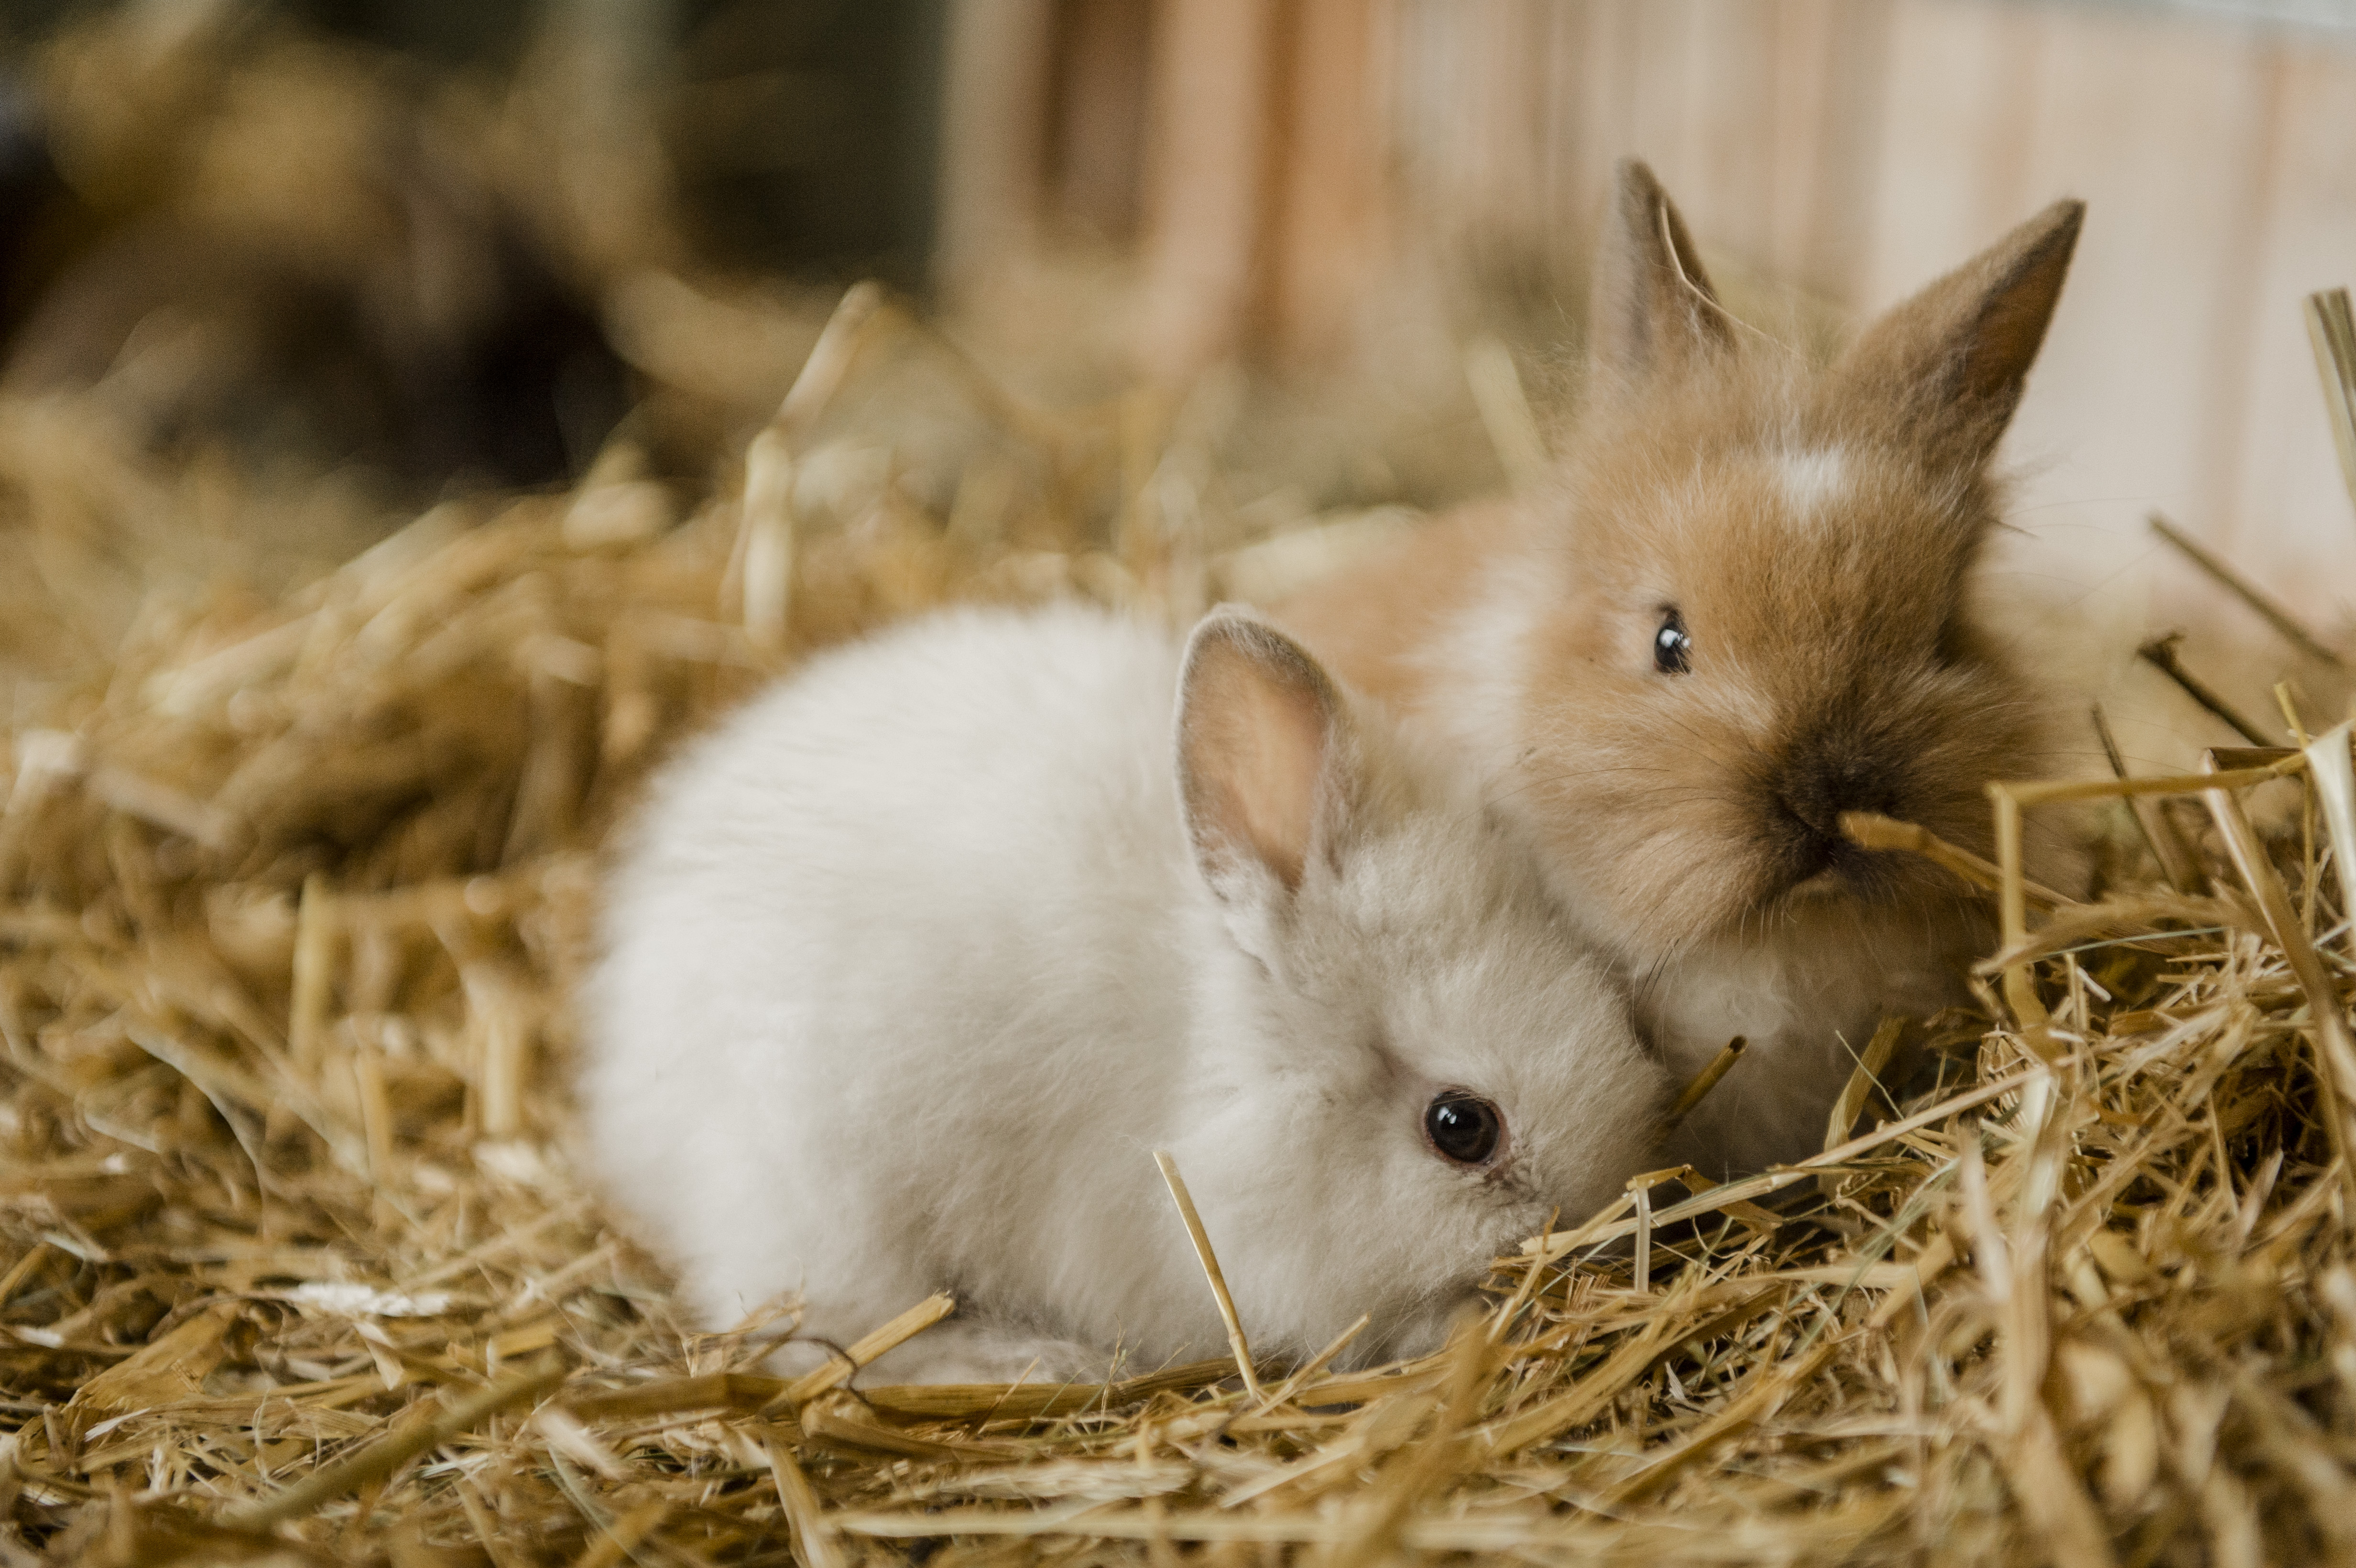 A white baby rabbit snuggles up to a baby brown rabbit on a bed of soft hay